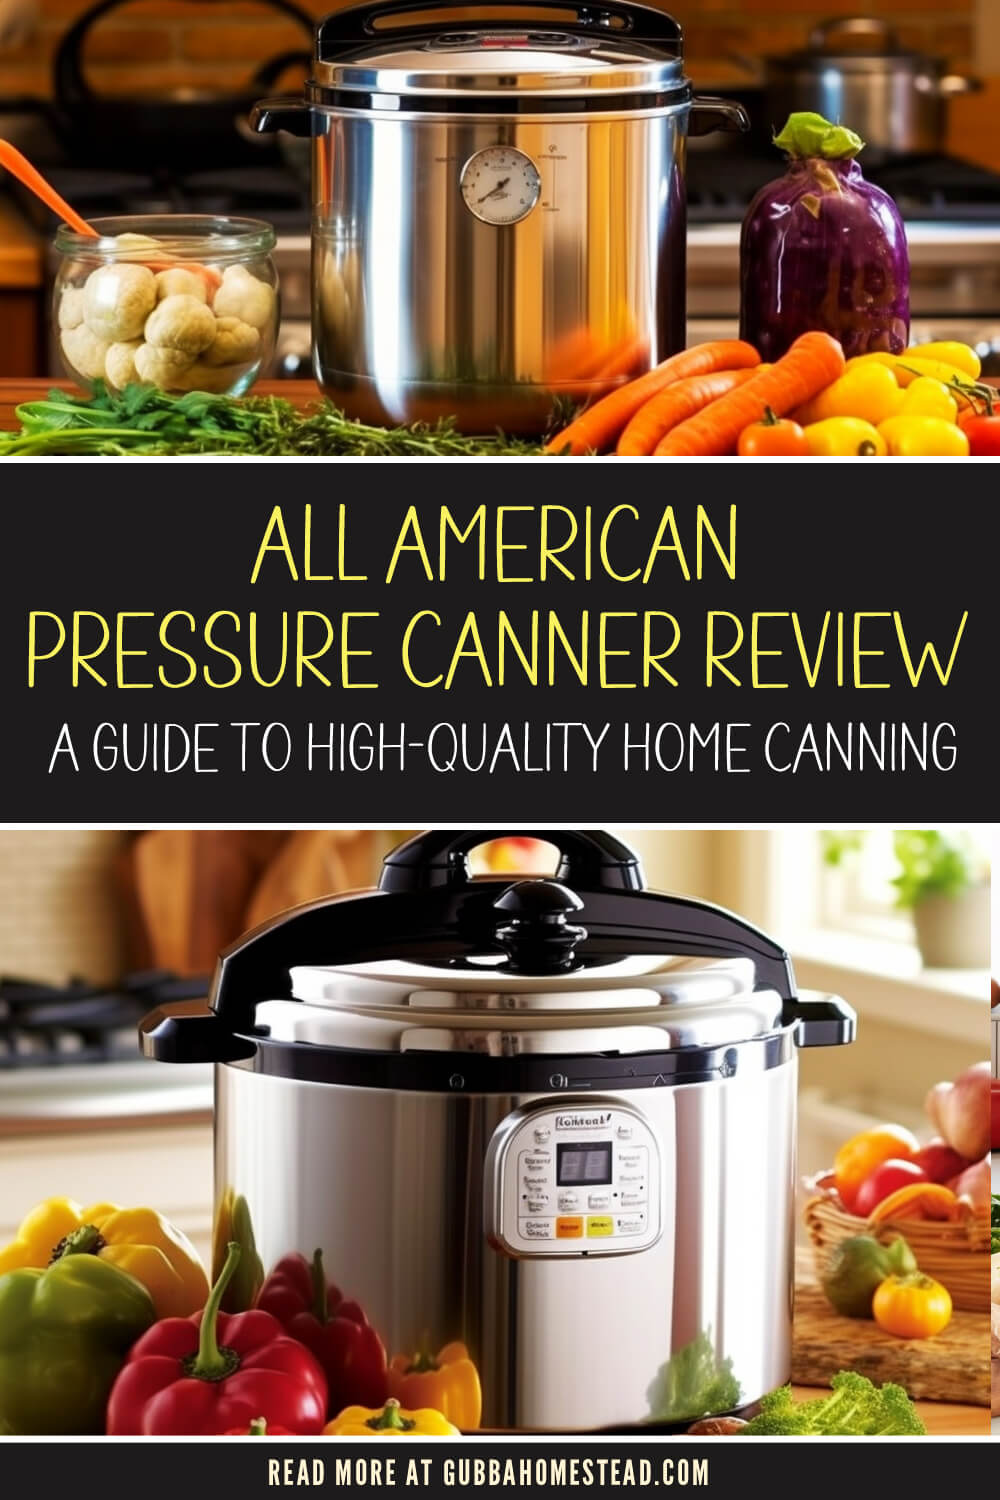 All American Pressure Canner Review: A Guide to High-Quality Home Canning